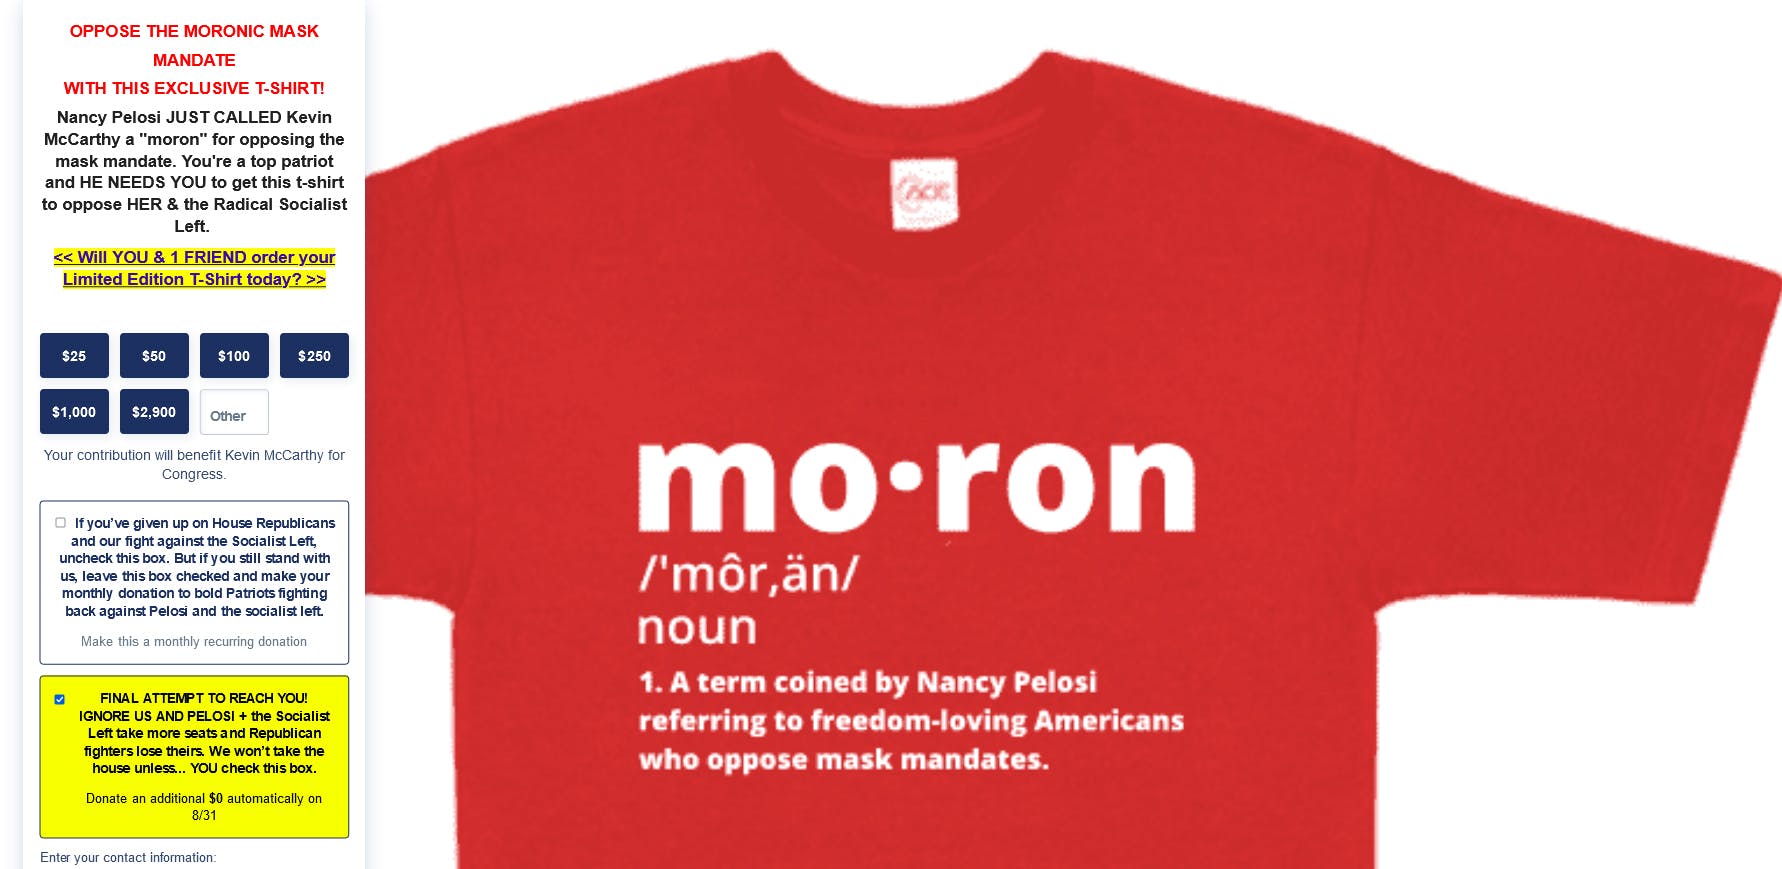 A shirt being sold by Kevin McCarthy that says moron on it.